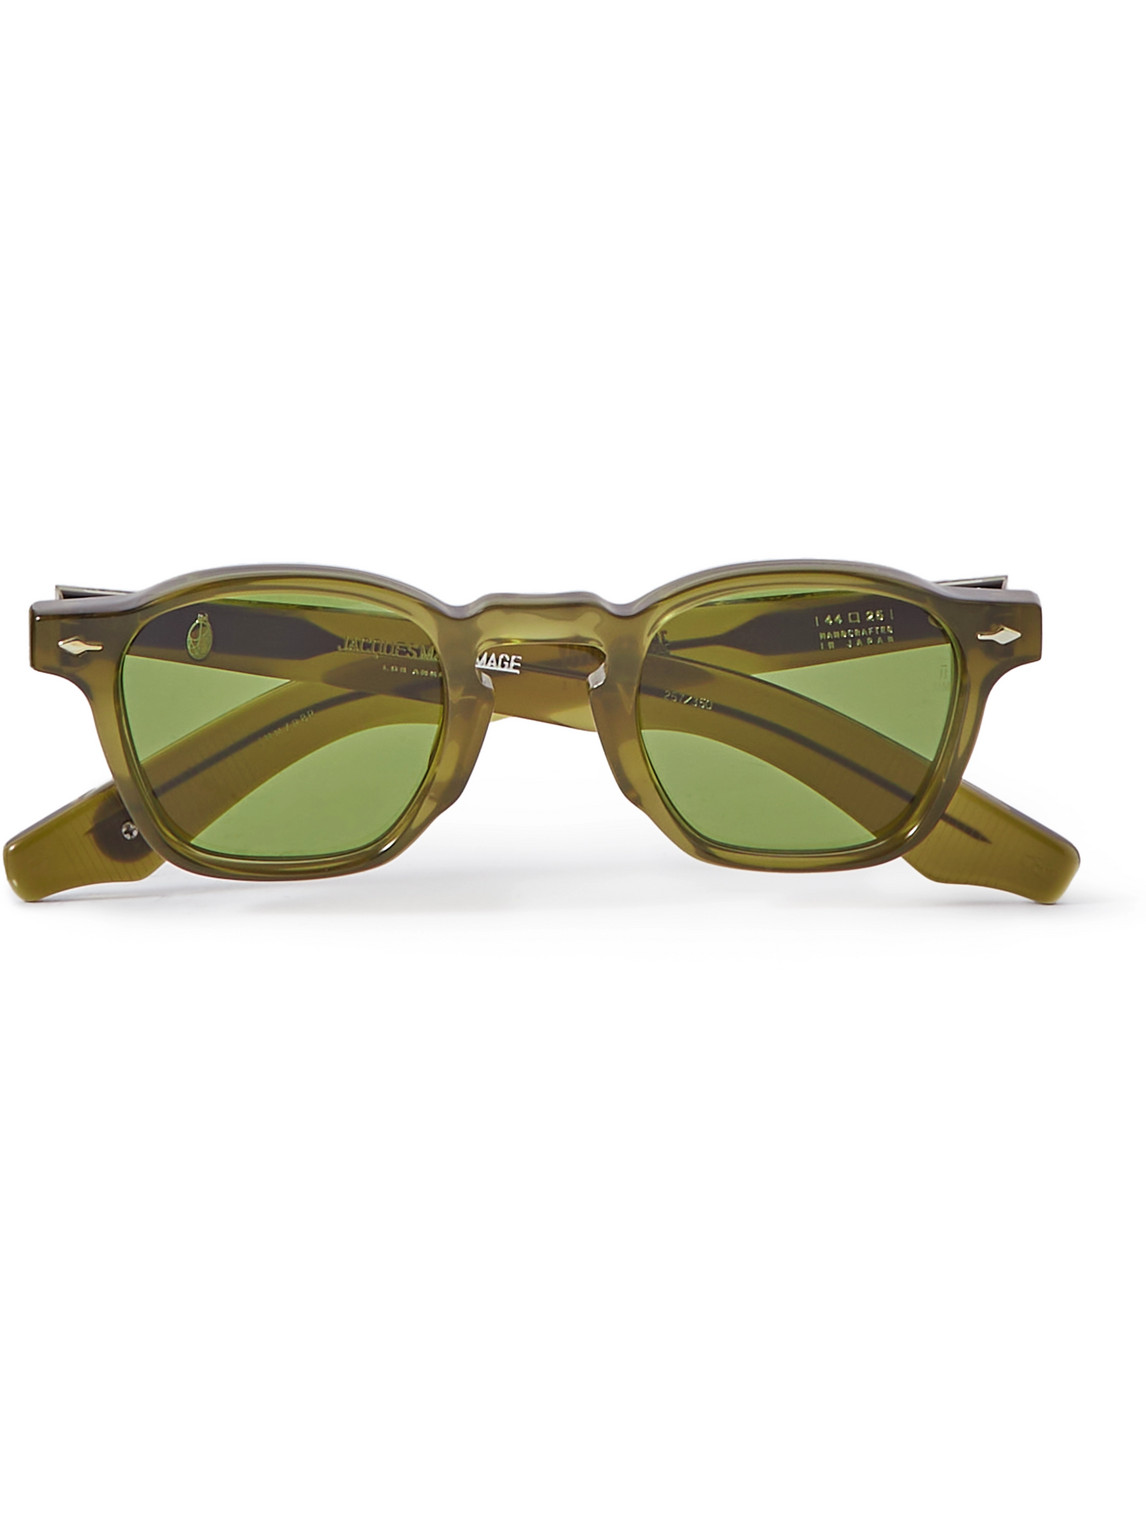 Green Yellowstone Forever Limited Edition Zephrin Sunglasses